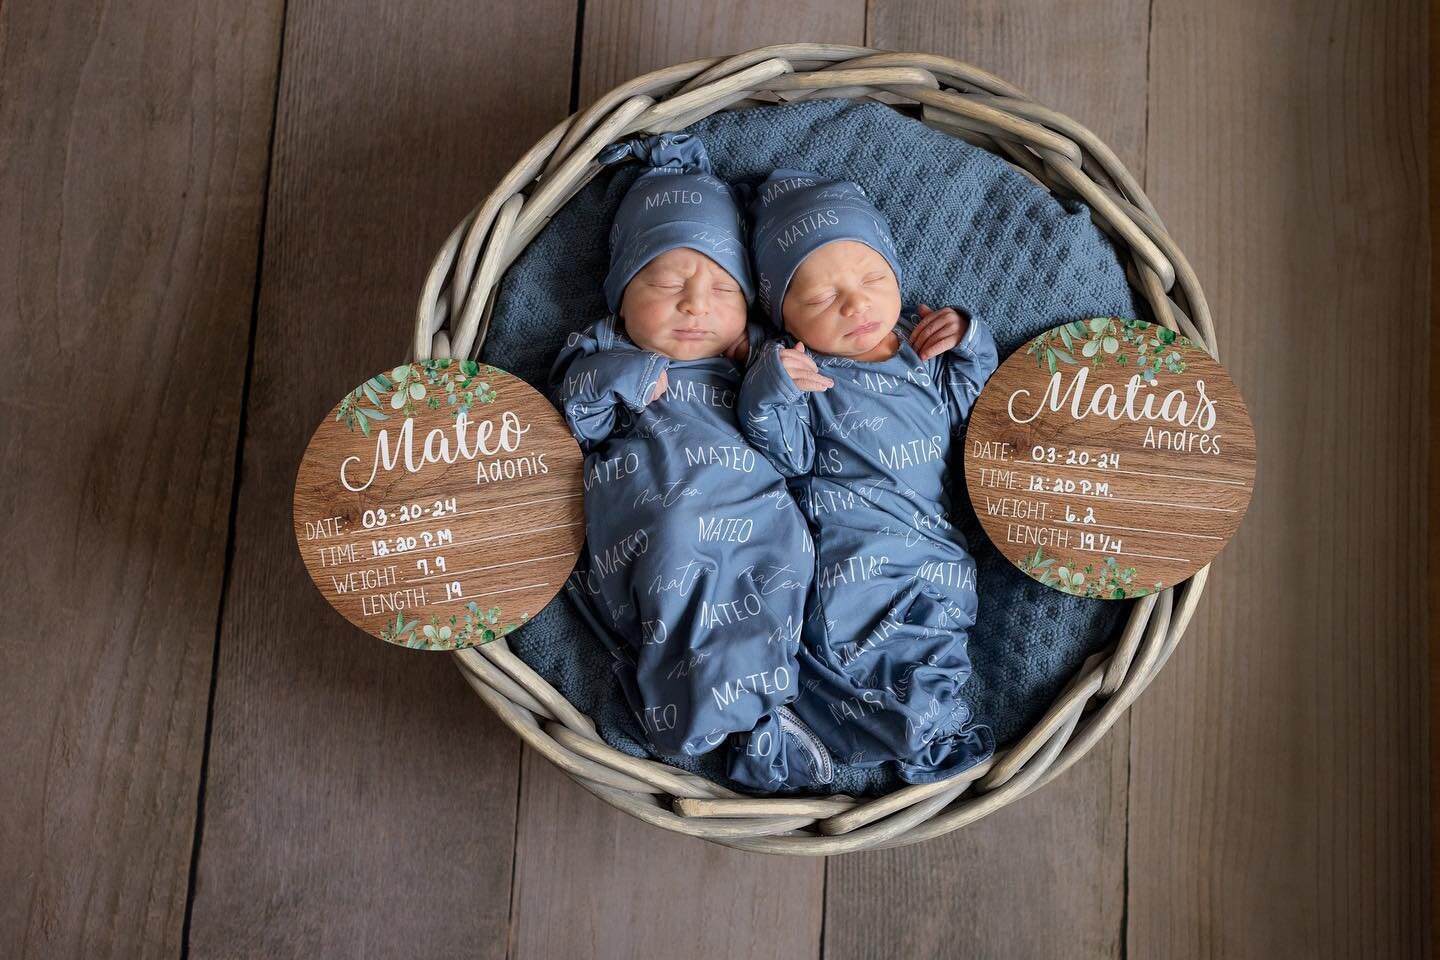 The wait is over &hellip;. we would like to proudly announce that Darian has given birth to not one but two adorable happy and healthy baby boys 💙💙 please help us congratulate her on a job well done !